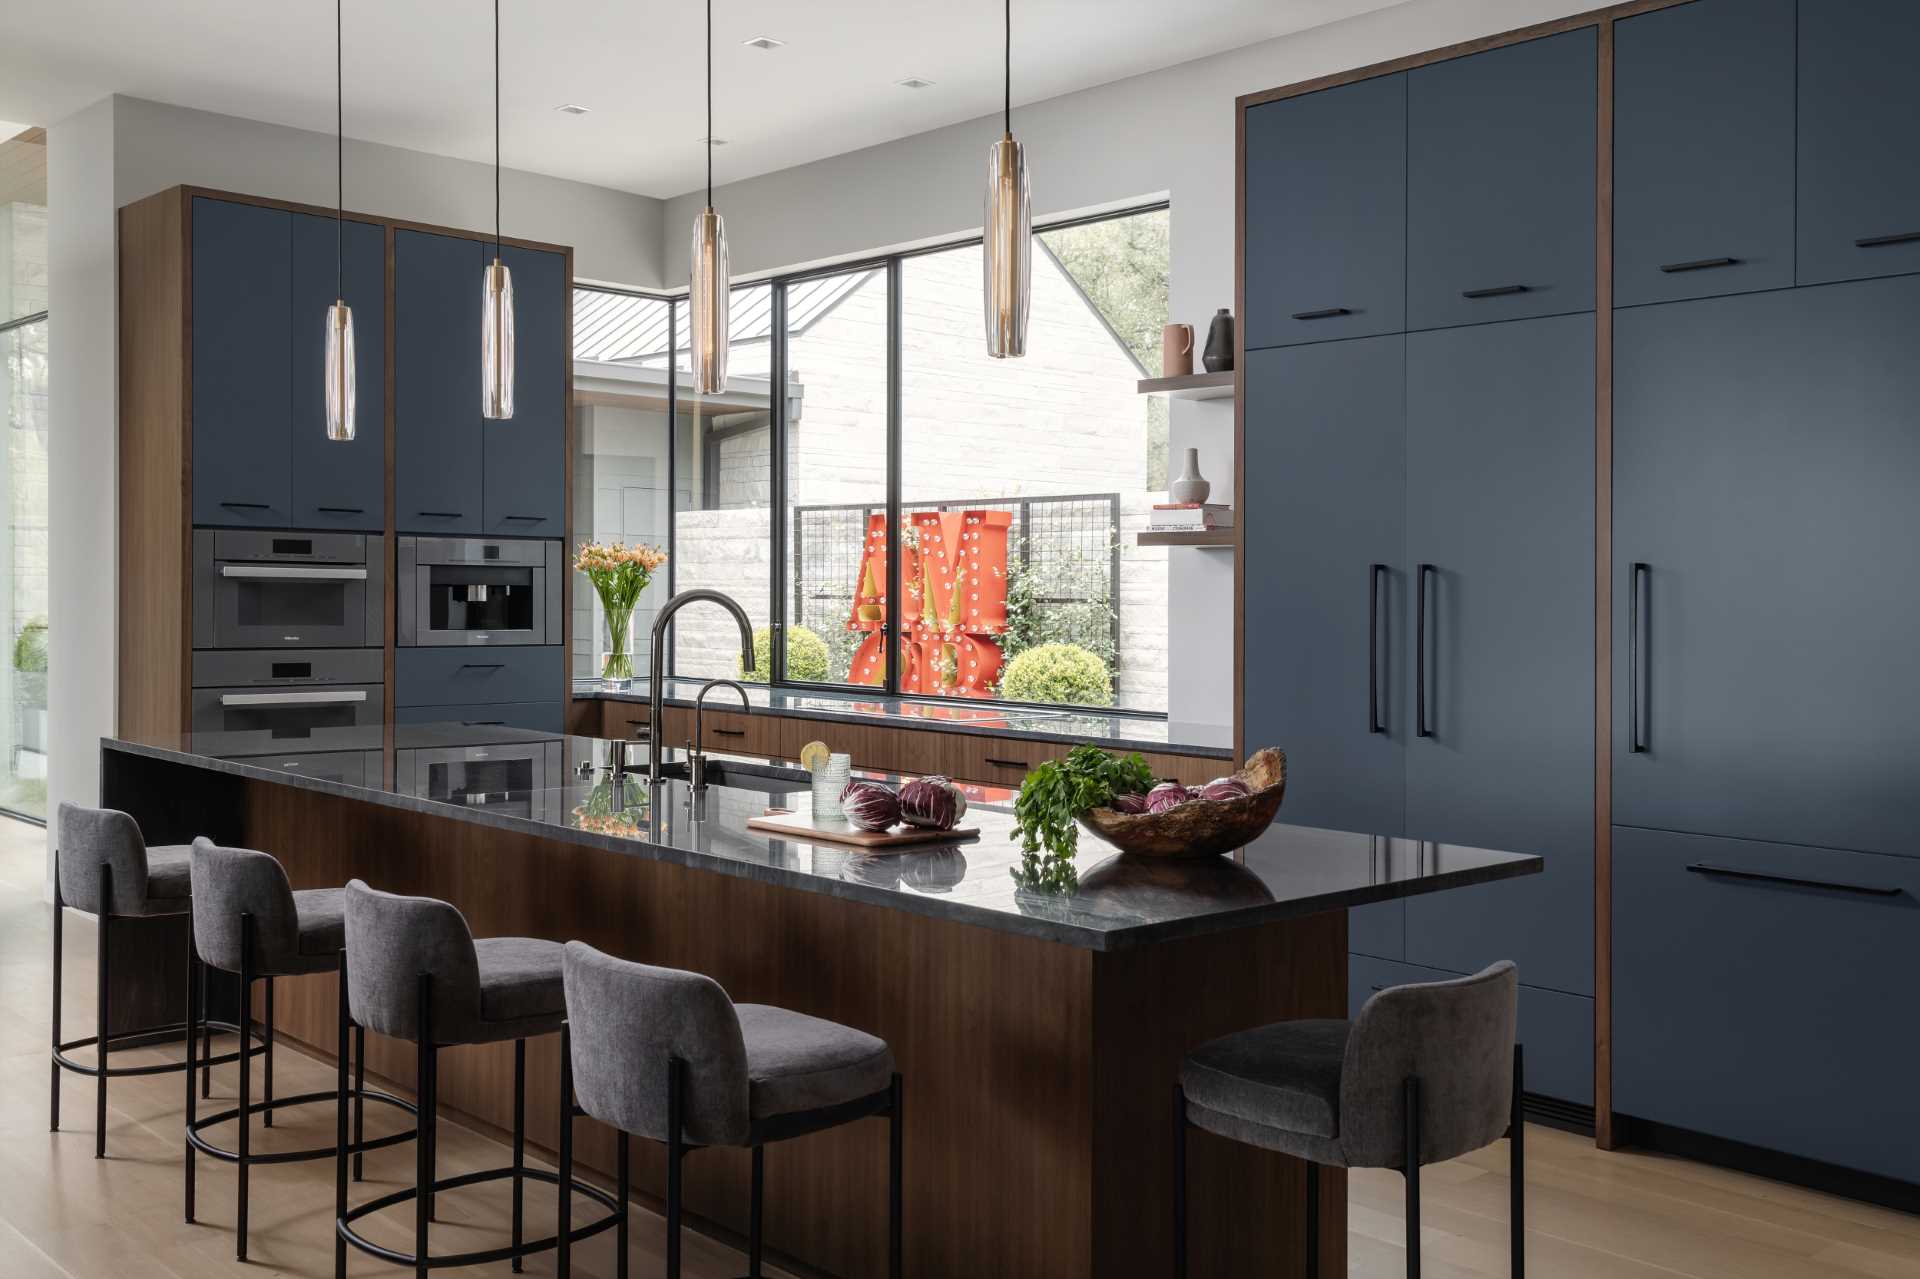 In this modern kitchen, deep walnut tones and a Diamante Nero quartzite create a bold appearance.